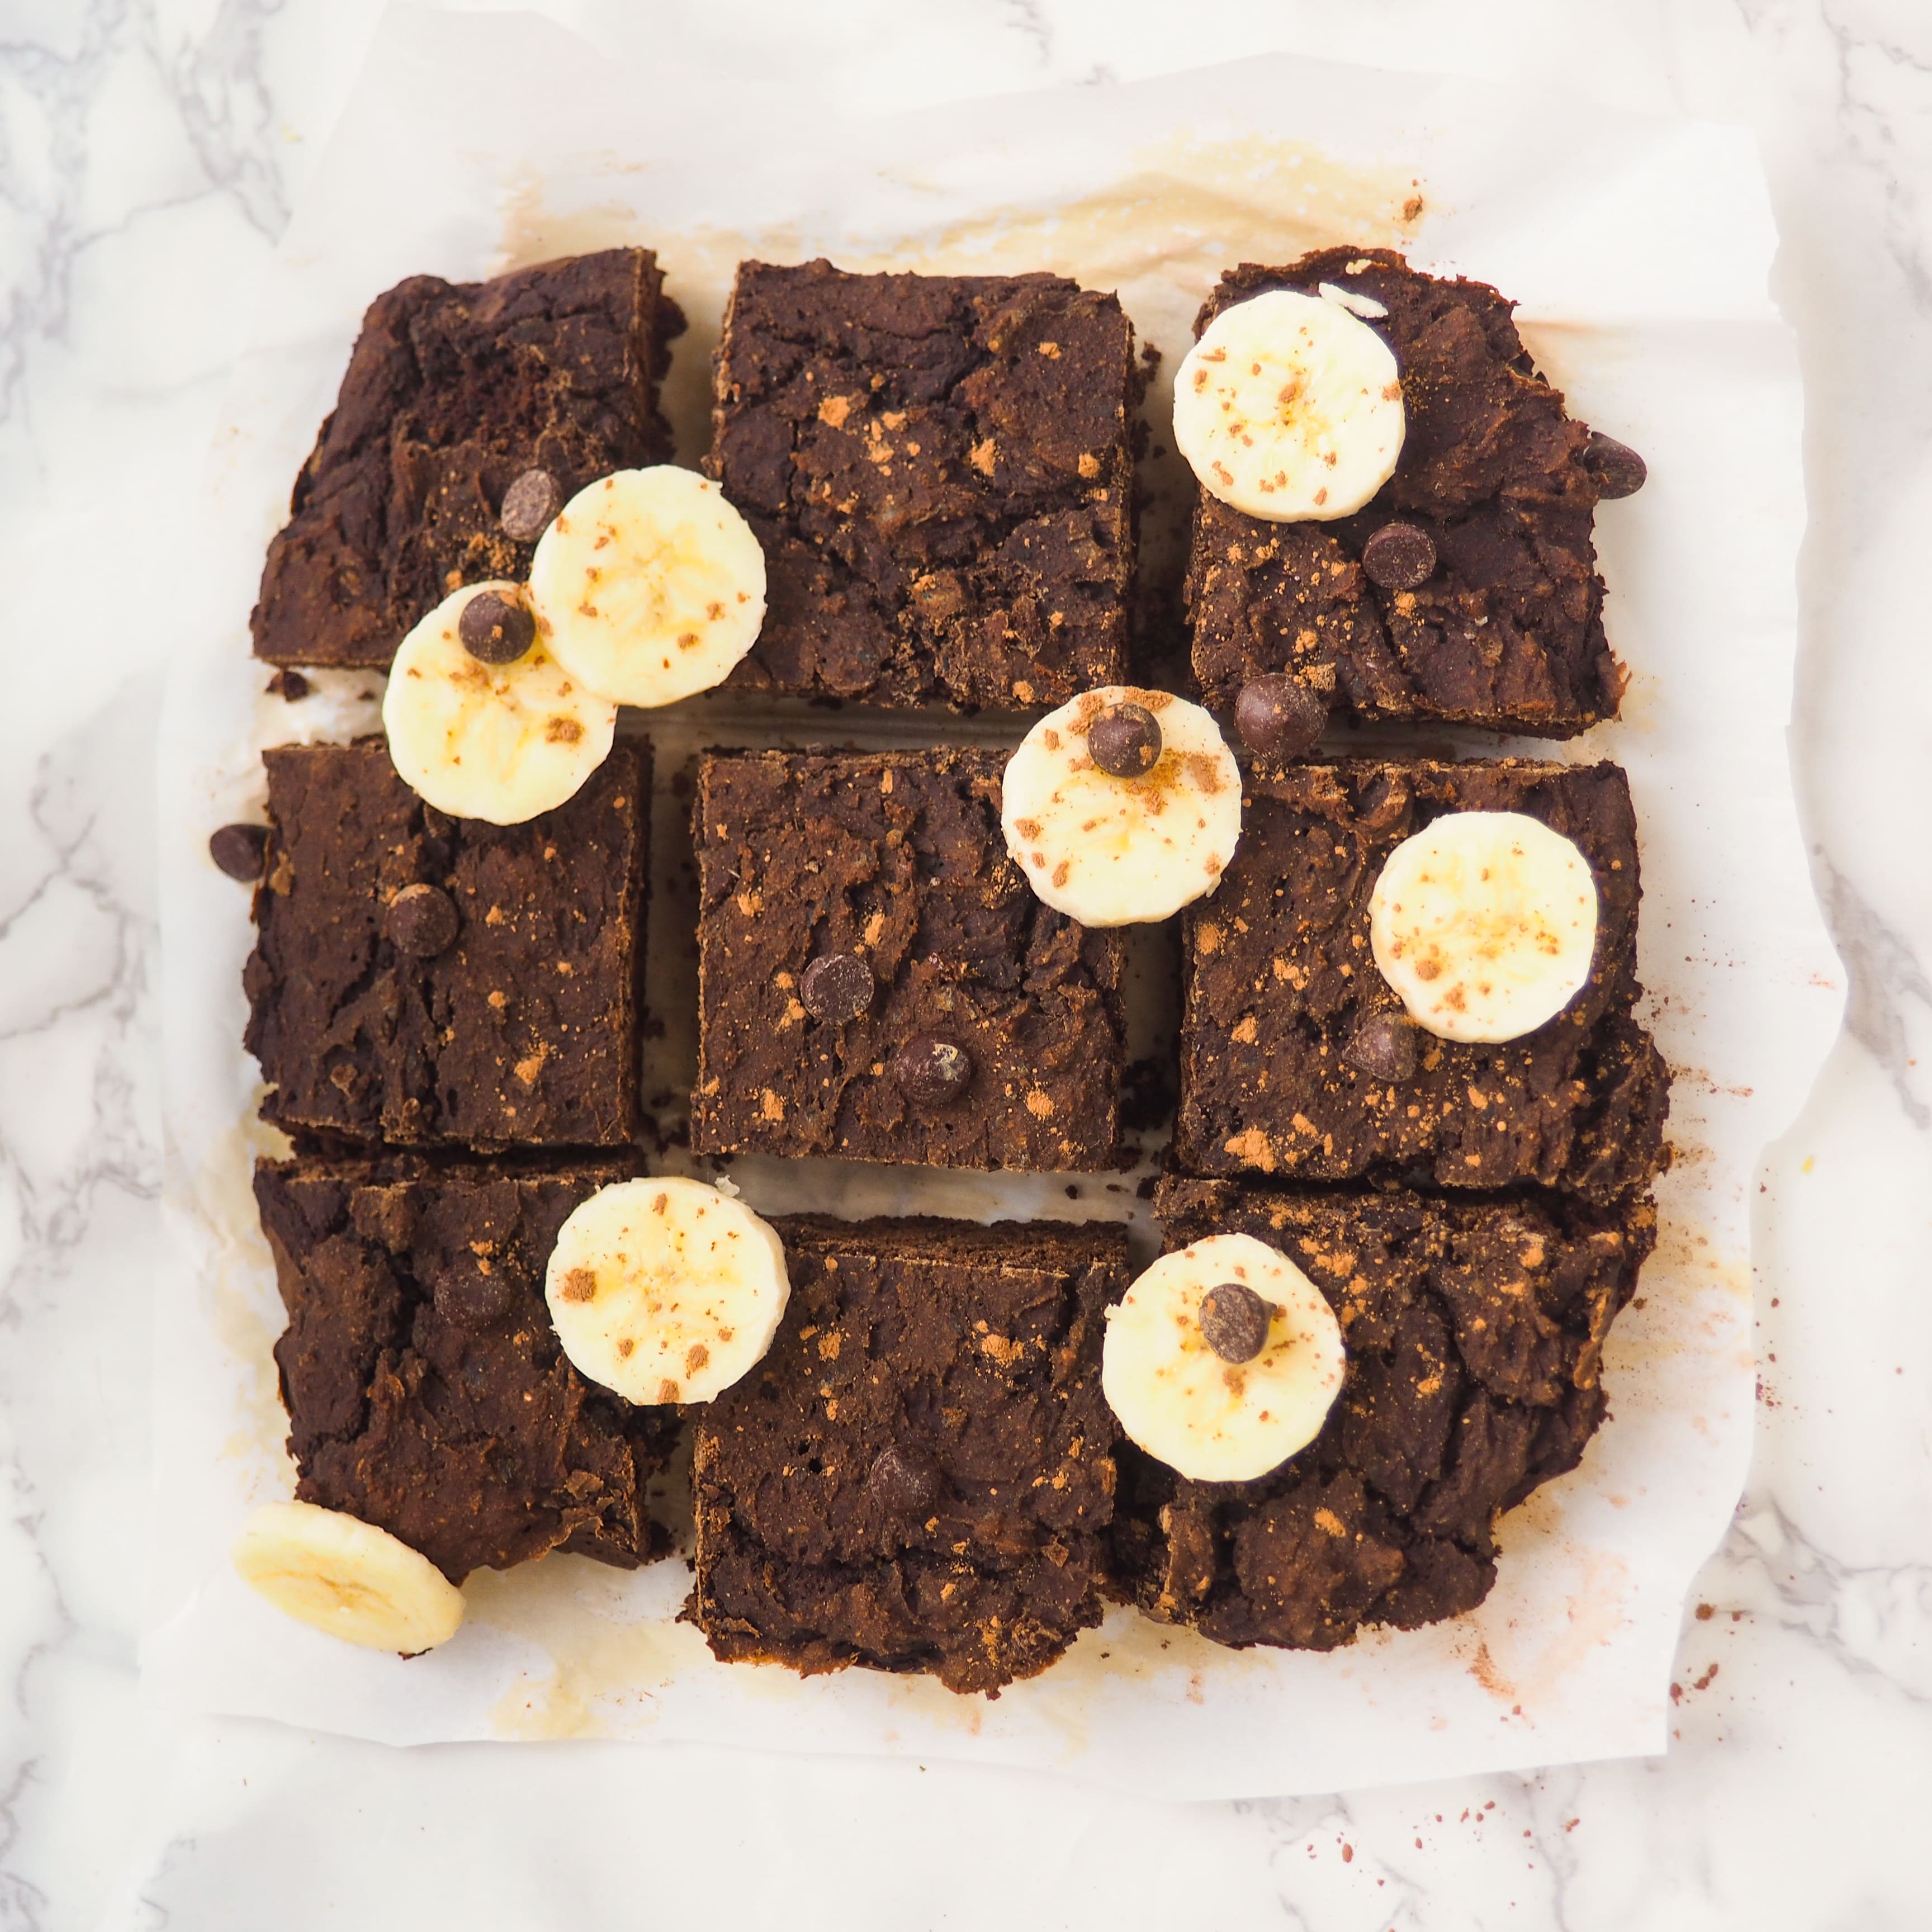 Chocolate banana brownies made using our superfood euphoric blend. Our euphoric blend has 6 powerful and delicious foods packed with antioxidants, healthy fats and adaptogens- Raw cacao, Carob, Mesquite, Maca, Lucuma and shredded Coconut. A healthy way to satisfy cravings and boost mood instantly!  Sustainably sourced, 'Better-than-fair-Trade', our blends are certified organic and plant-based making it vegan friendly with no added sugar!